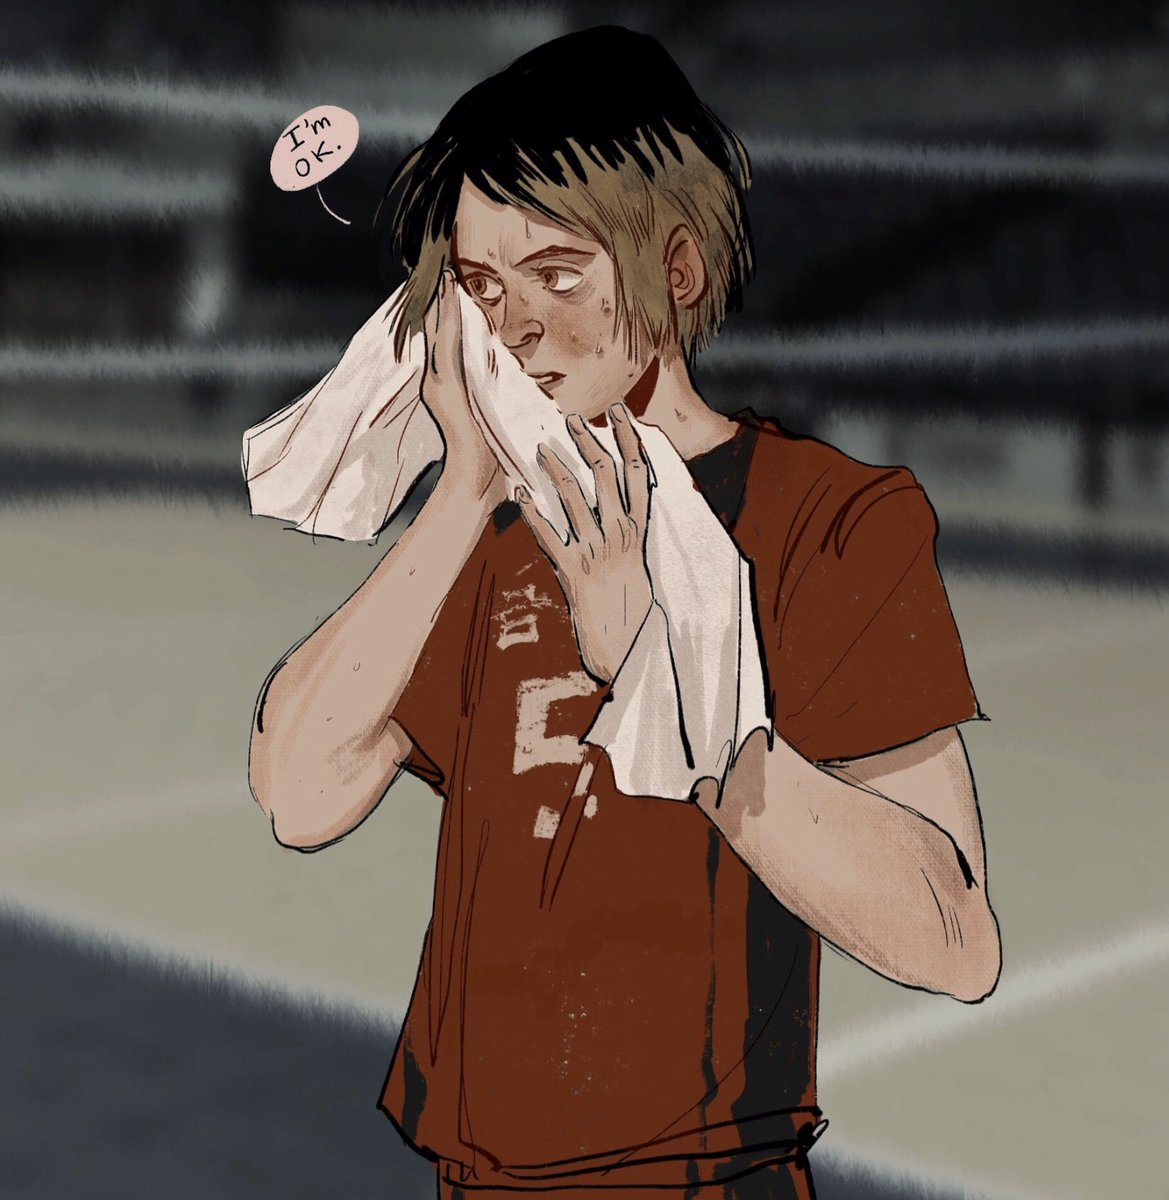 by the way this is Kenma from 2016 and now 